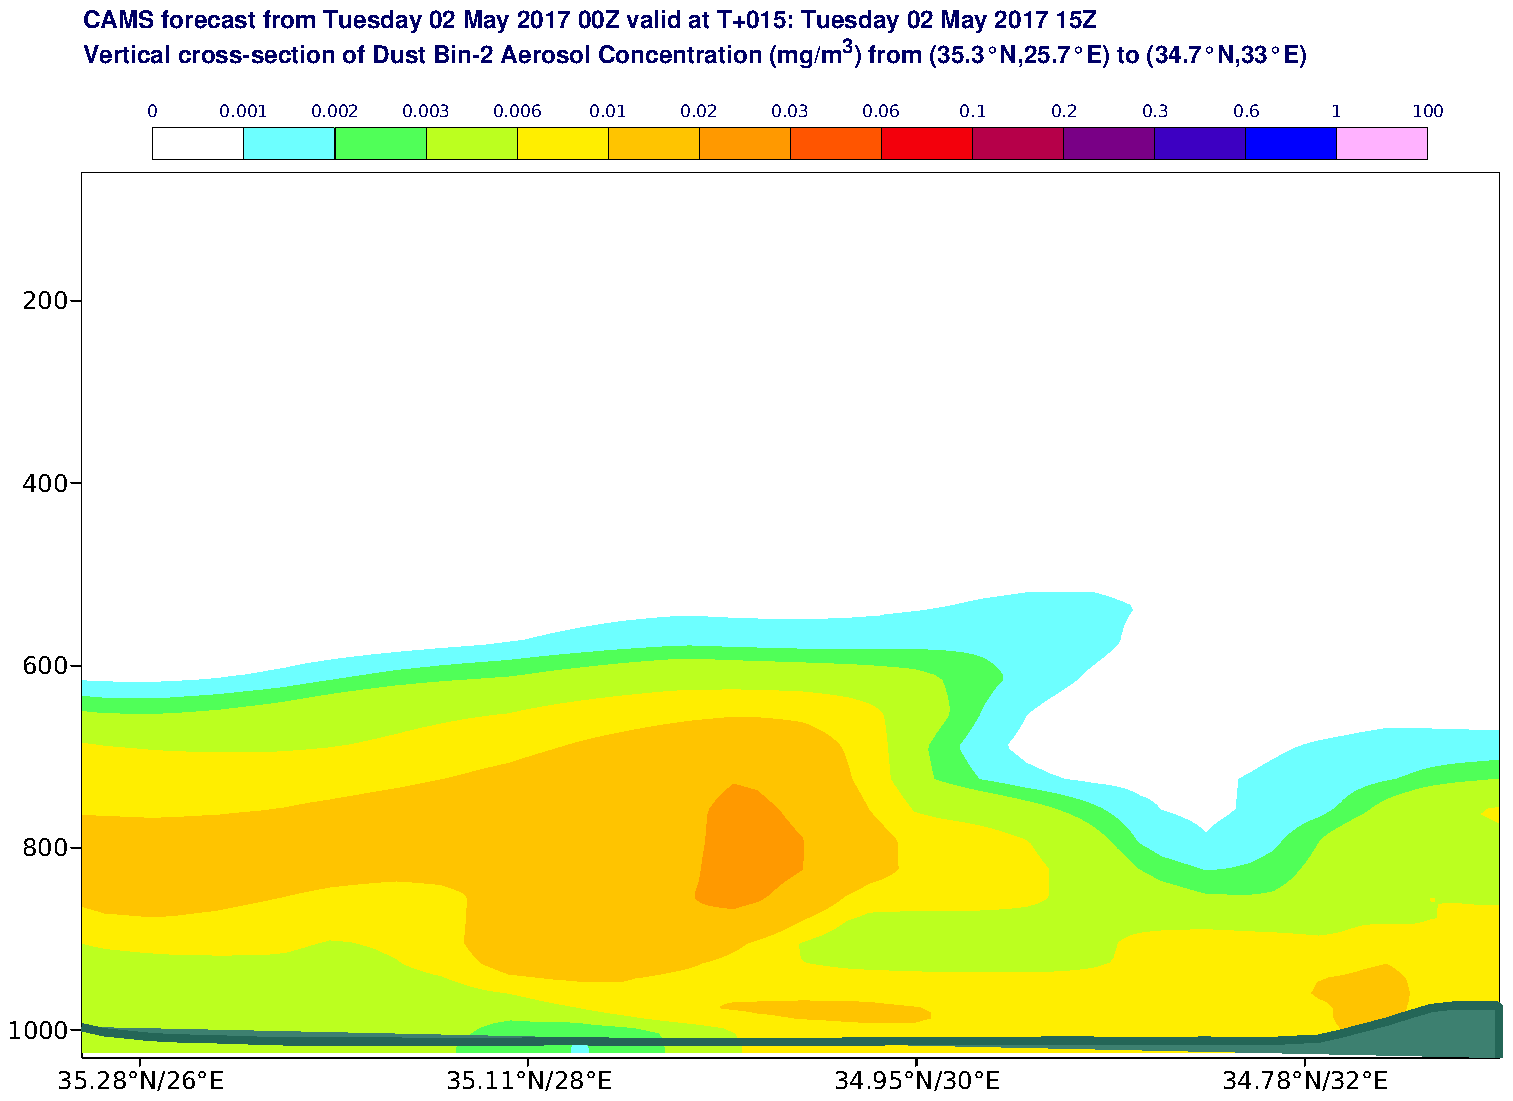 Vertical cross-section of Dust Bin-2 Aerosol Concentration (mg/m3) valid at T15 - 2017-05-02 15:00